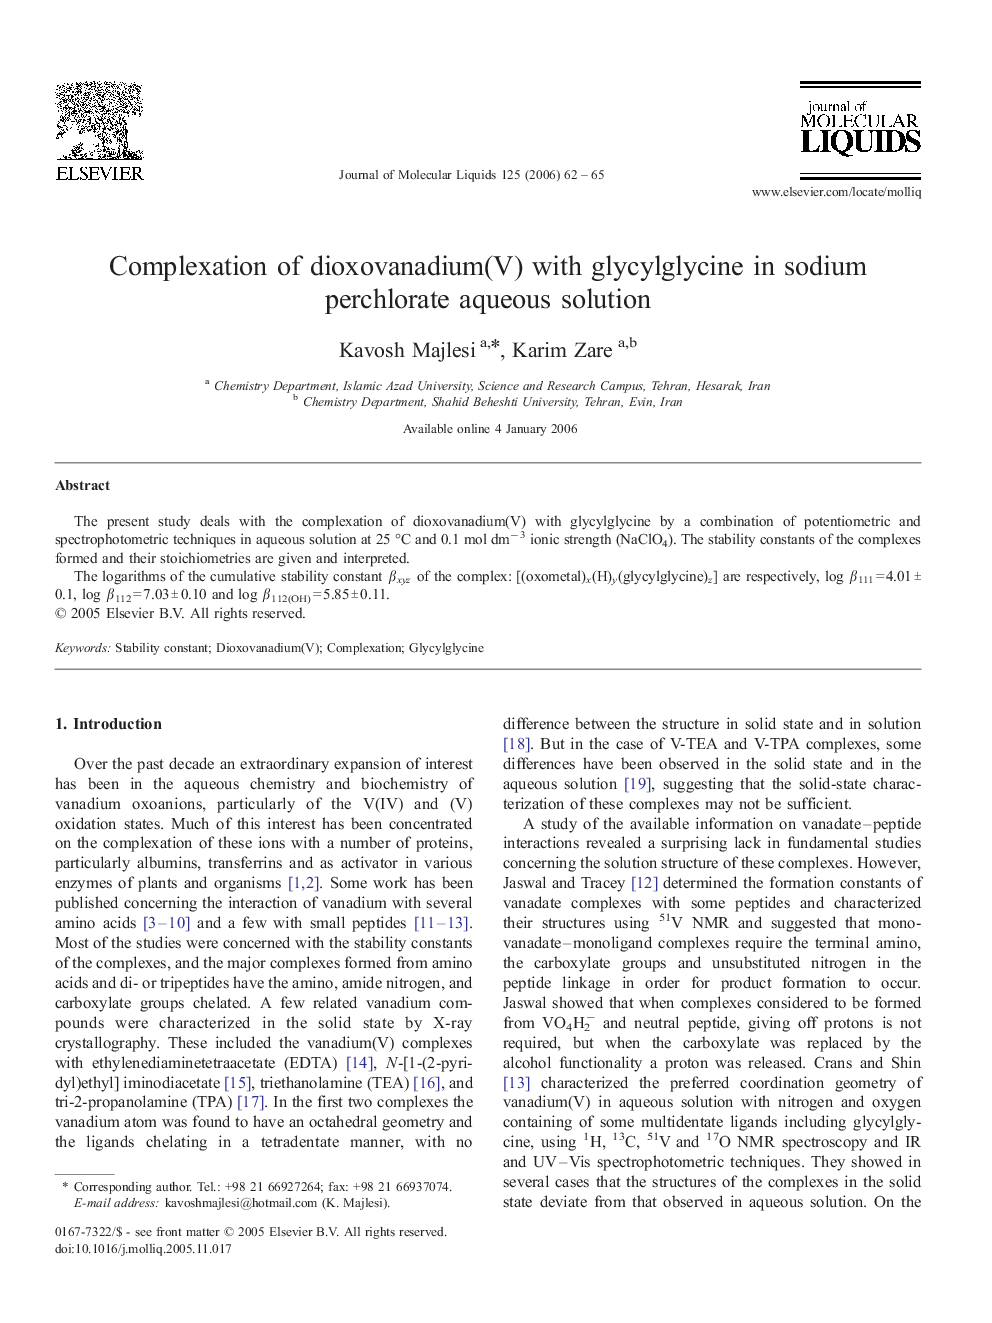 Complexation of dioxovanadium(V) with glycylglycine in sodium perchlorate aqueous solution